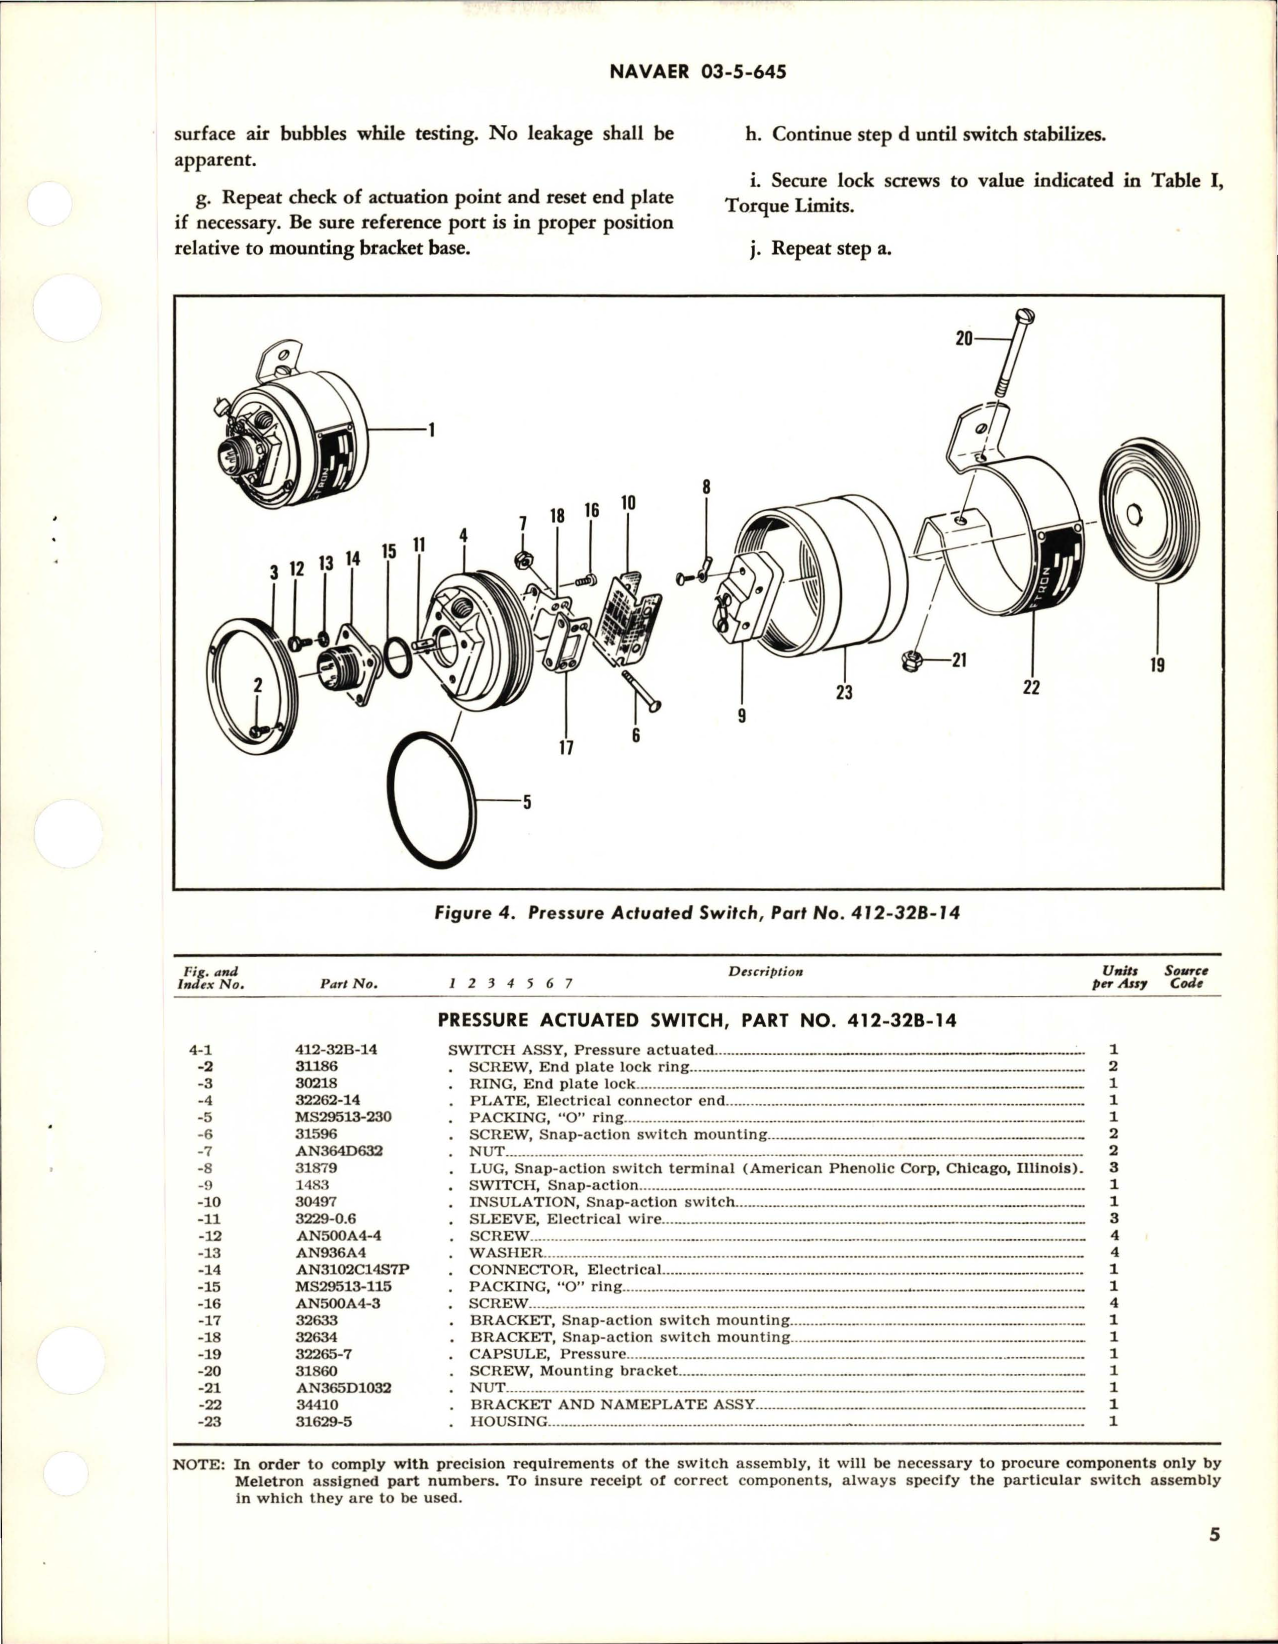 Sample page 5 from AirCorps Library document: Overhaul Instructions with Parts Breakdown for Pressure Actuated Switch - Part 412-32B-14